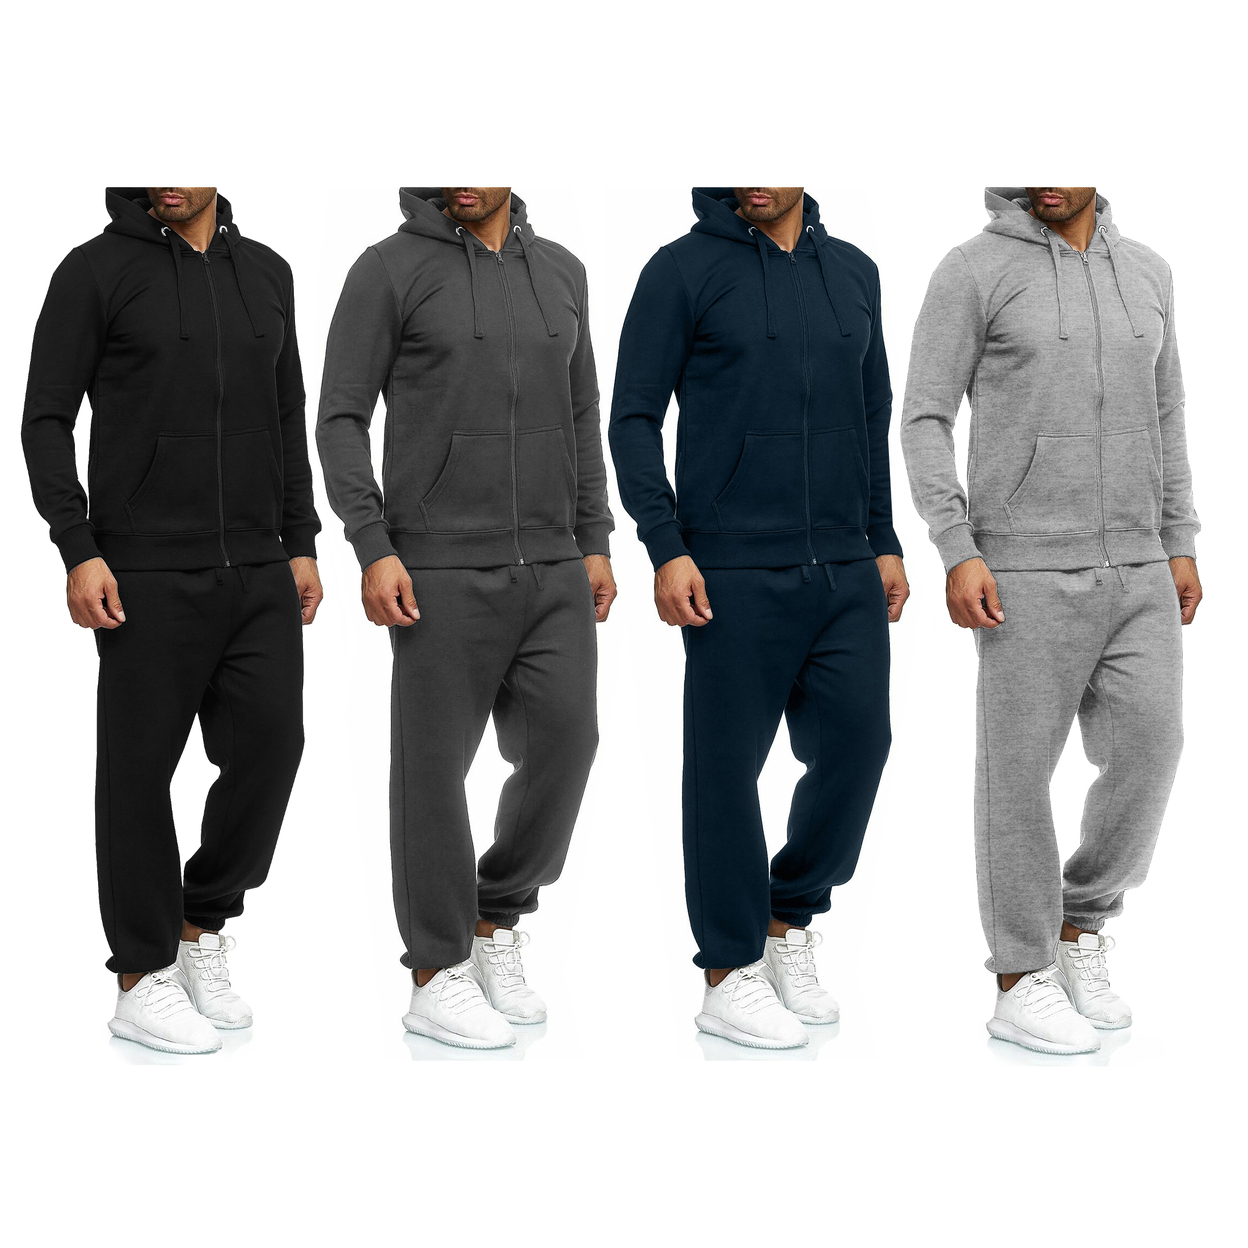 Multi-Pack: Men's Casual Big & Tall Athletic Active Winter Warm Fleece Lined Full Zip Tracksuit Jogger Set - Navy, 1-pack, Small